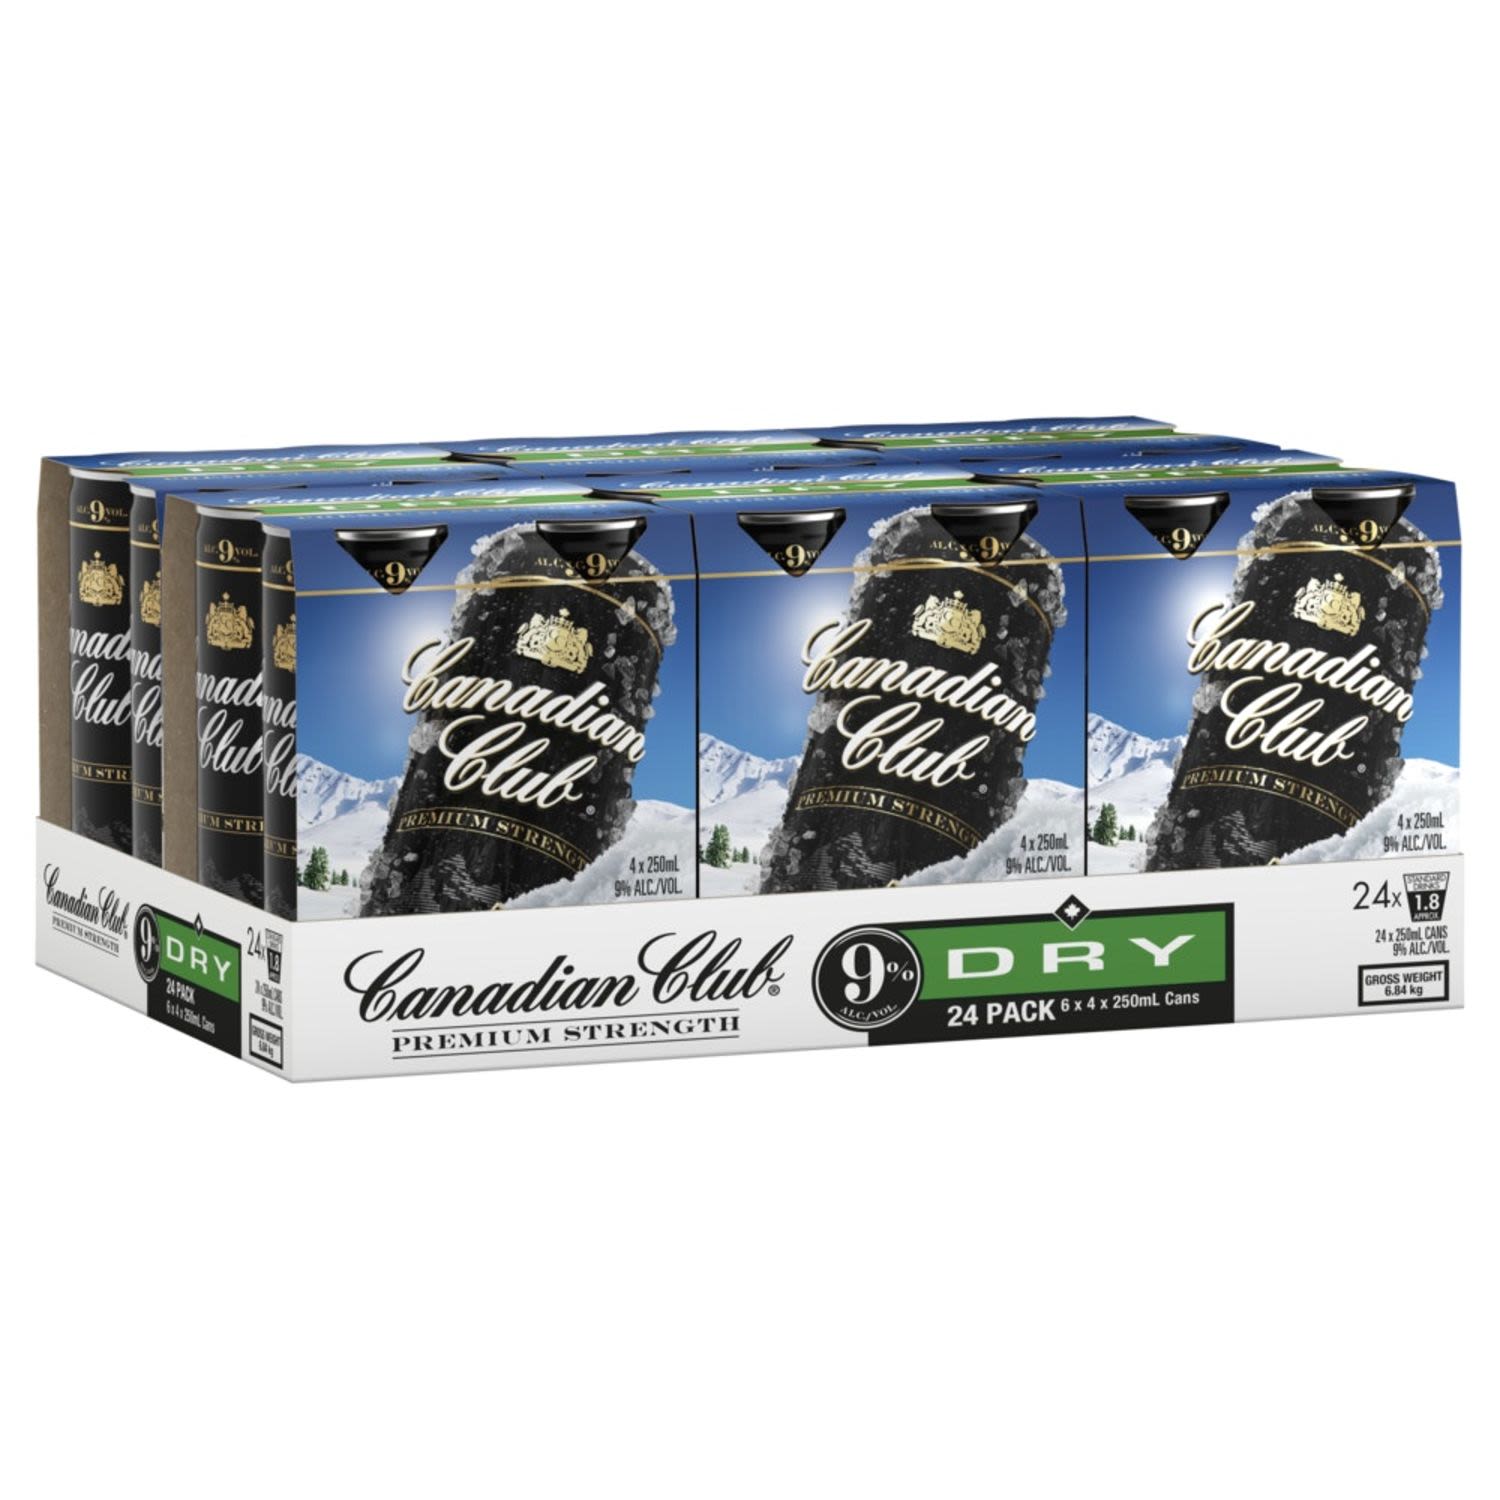 Canadian Club & Dry 9% Premium Can 250mL 24 Pack